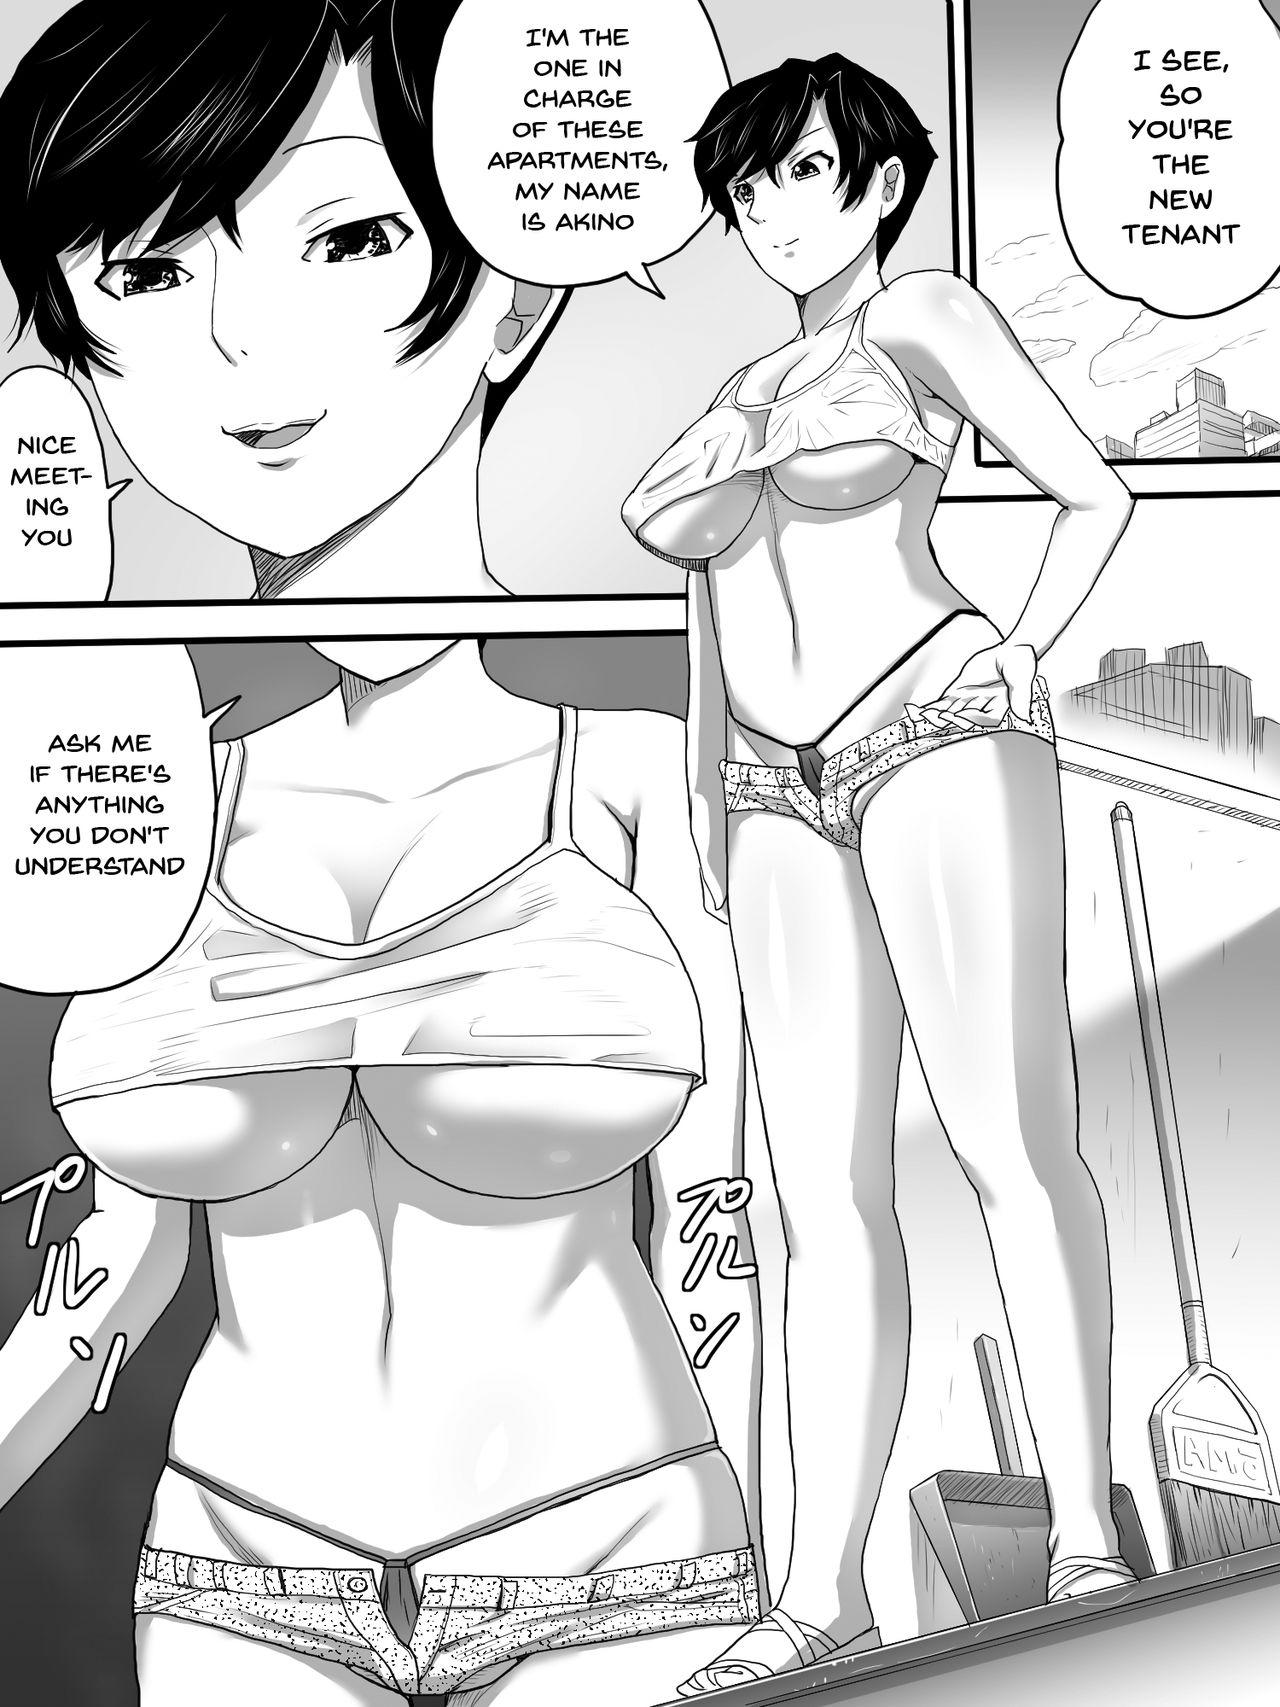 Gay Bus Kanrinin-san wa Bihin | The Apartment Manager Is Part of The Furnishings - Original Oil - Page 8